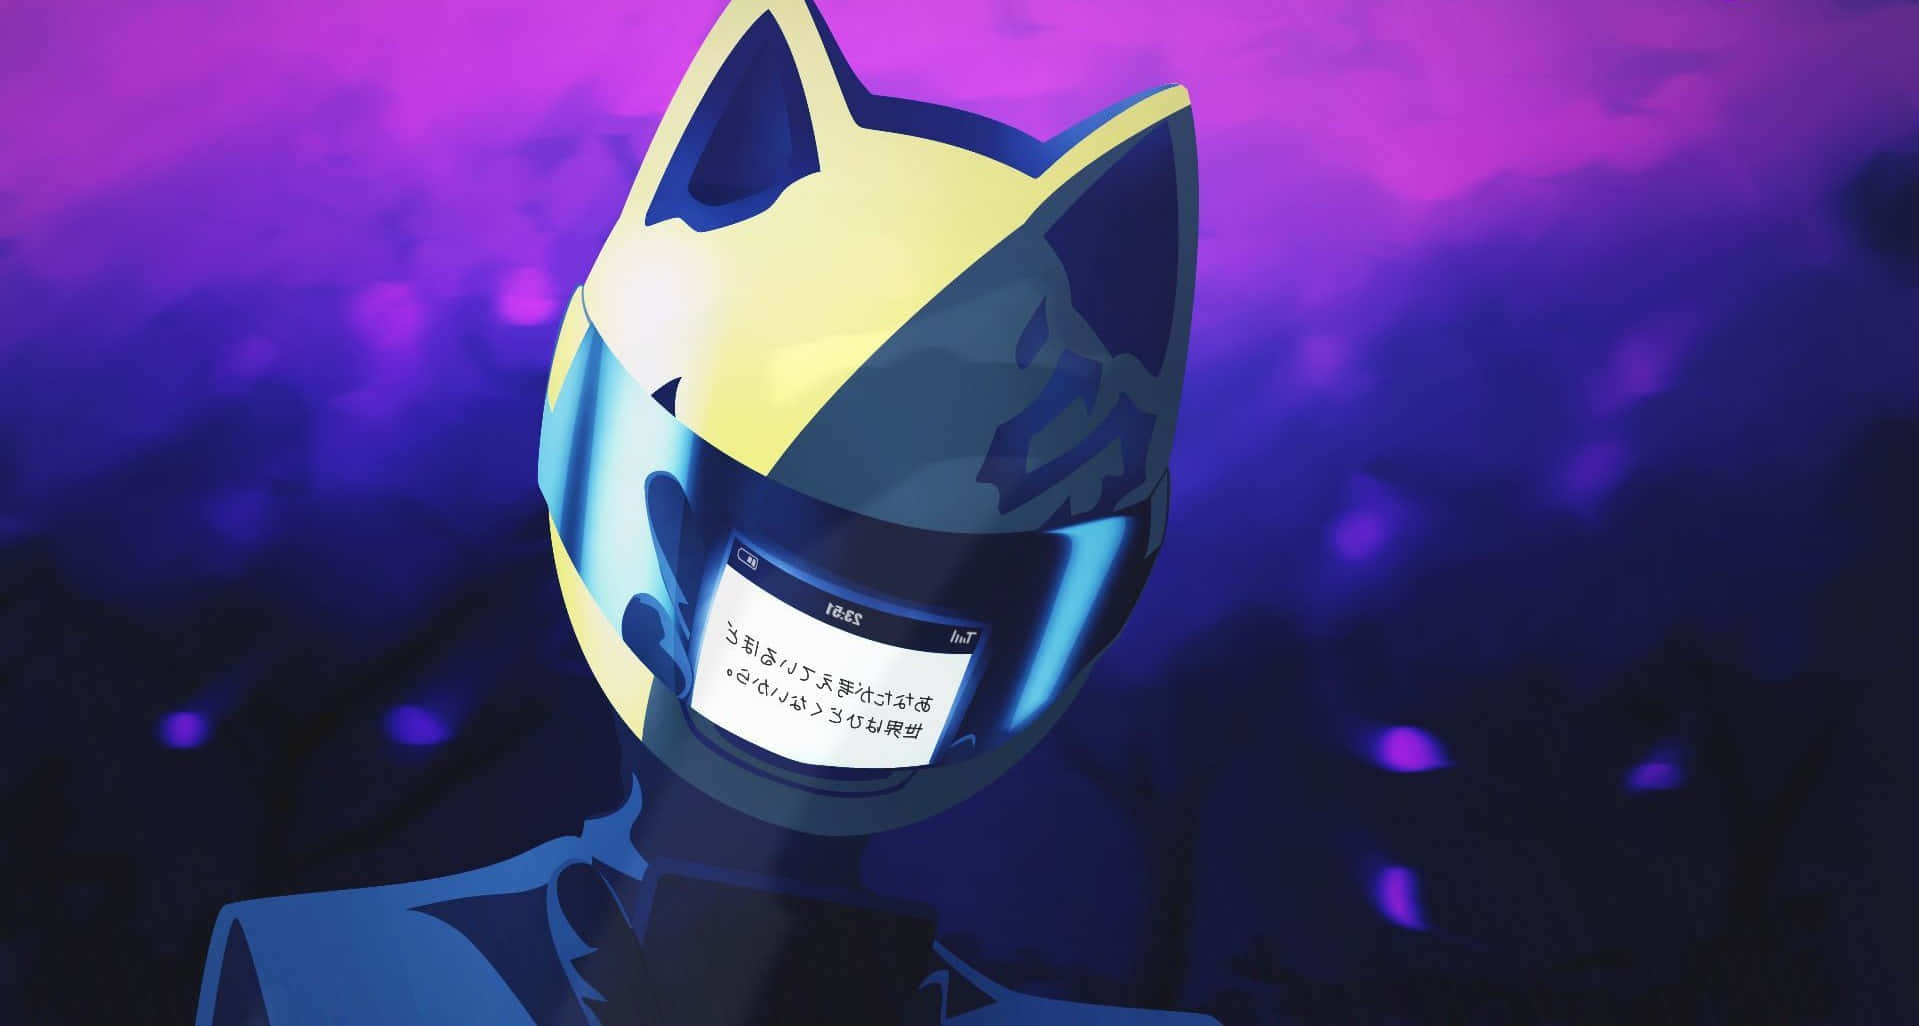 Celty Sturluson on her motorcycle, the city night lights shimmering behind her Wallpaper